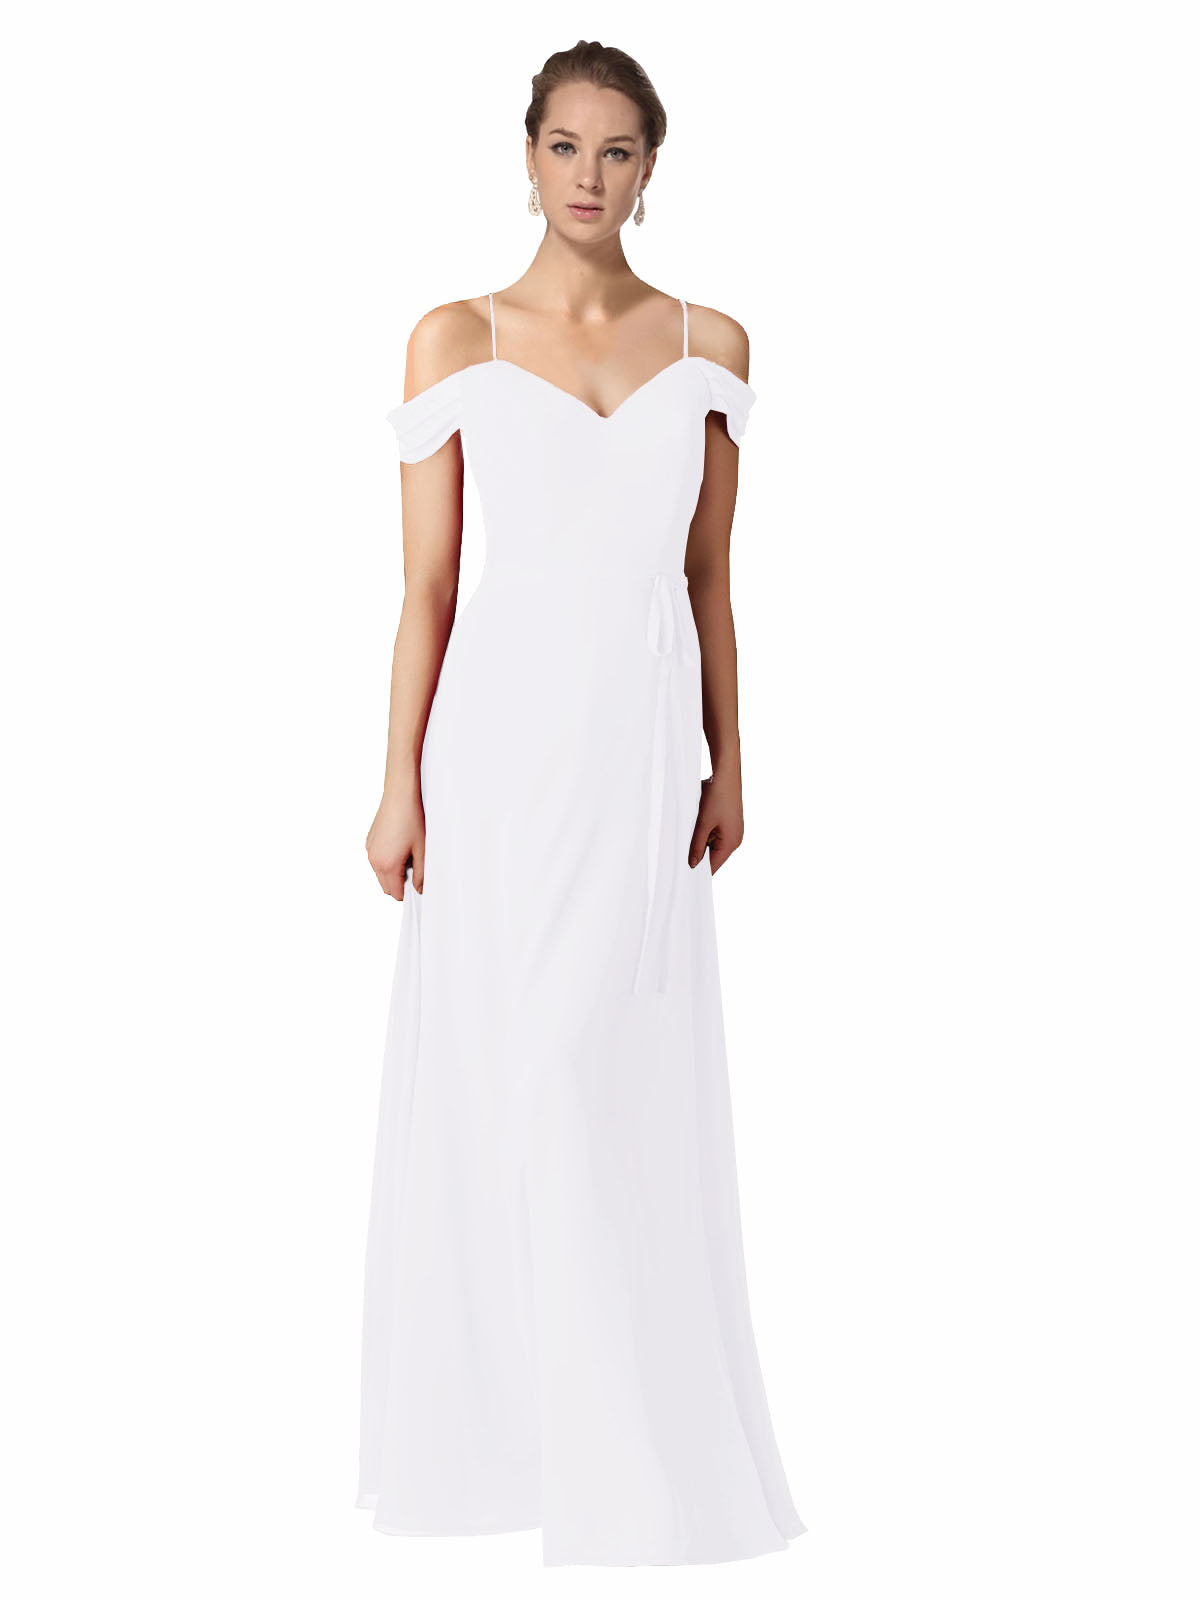 White A-Line Sweetheart Off the Shoulder Long Bridesmaid Dress Alyssa